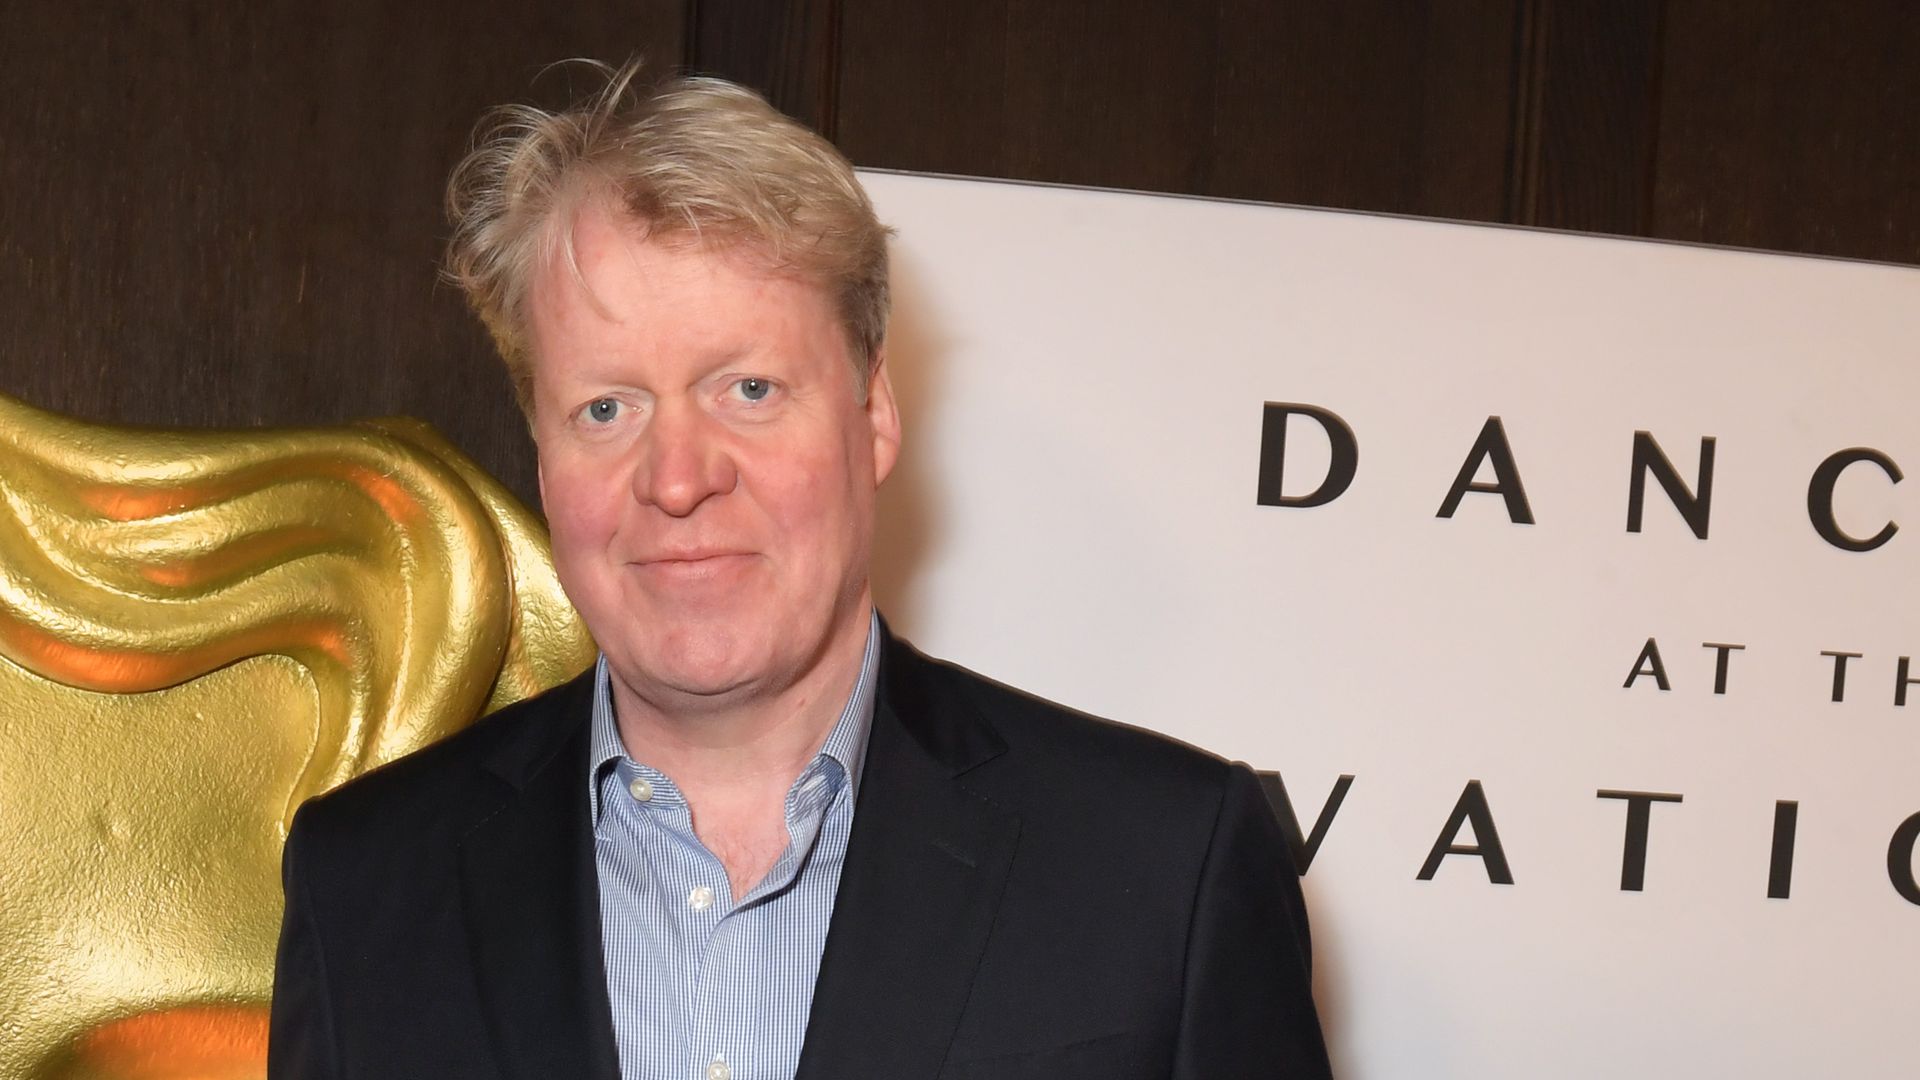 Charles Spencer, 9th Earl Spencer, attends the UK premiere of "Dancing At The Vatican" at BAFTA